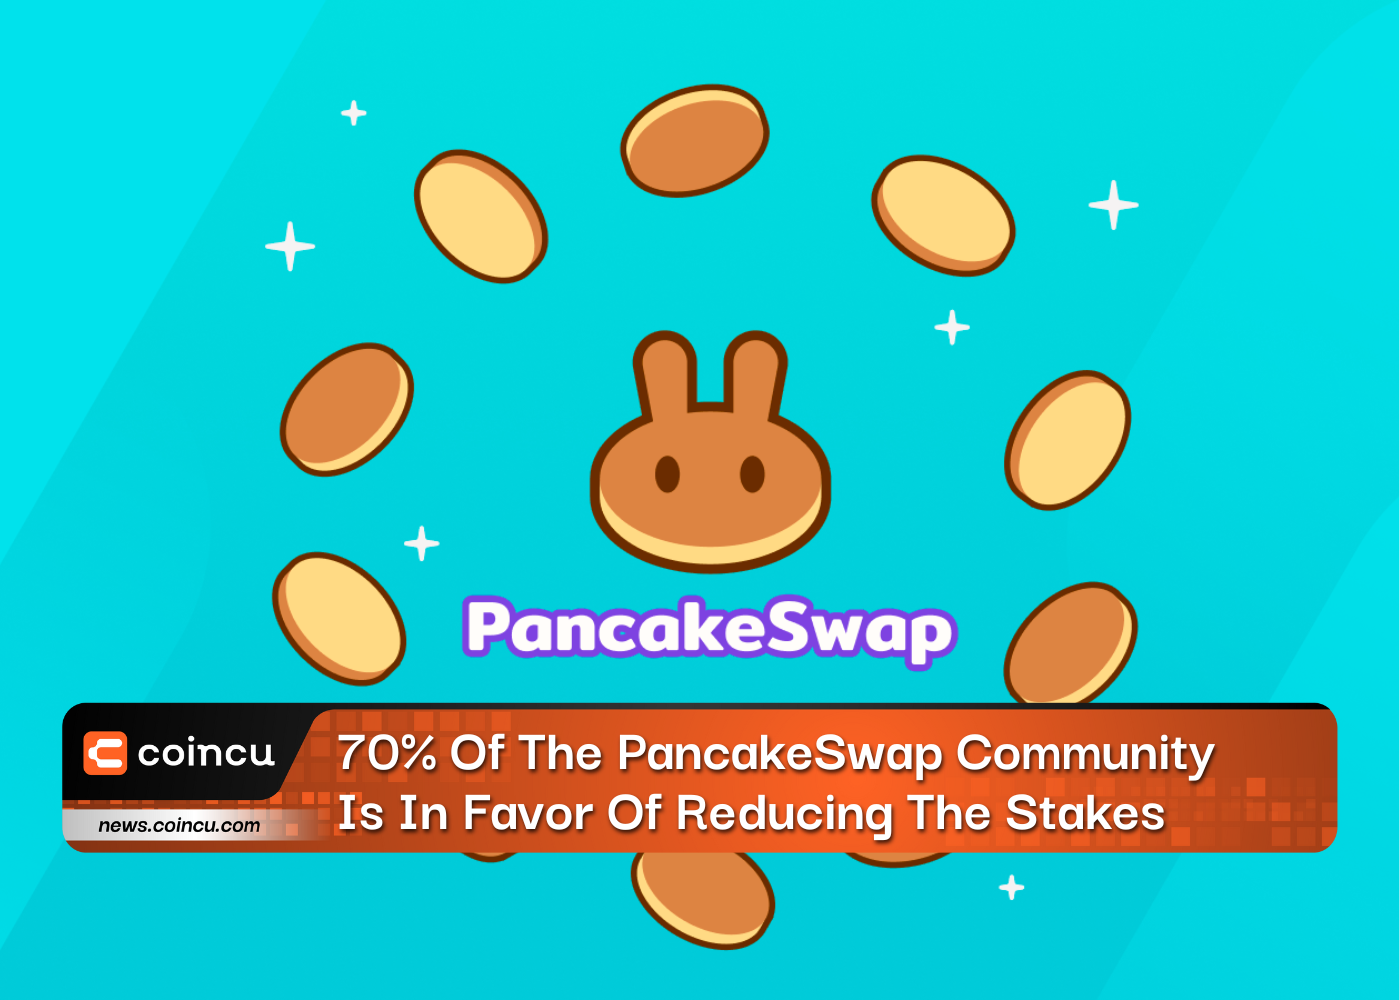 70% Of The PancakeSwap Community Is In Favor Of Reducing The Stakes